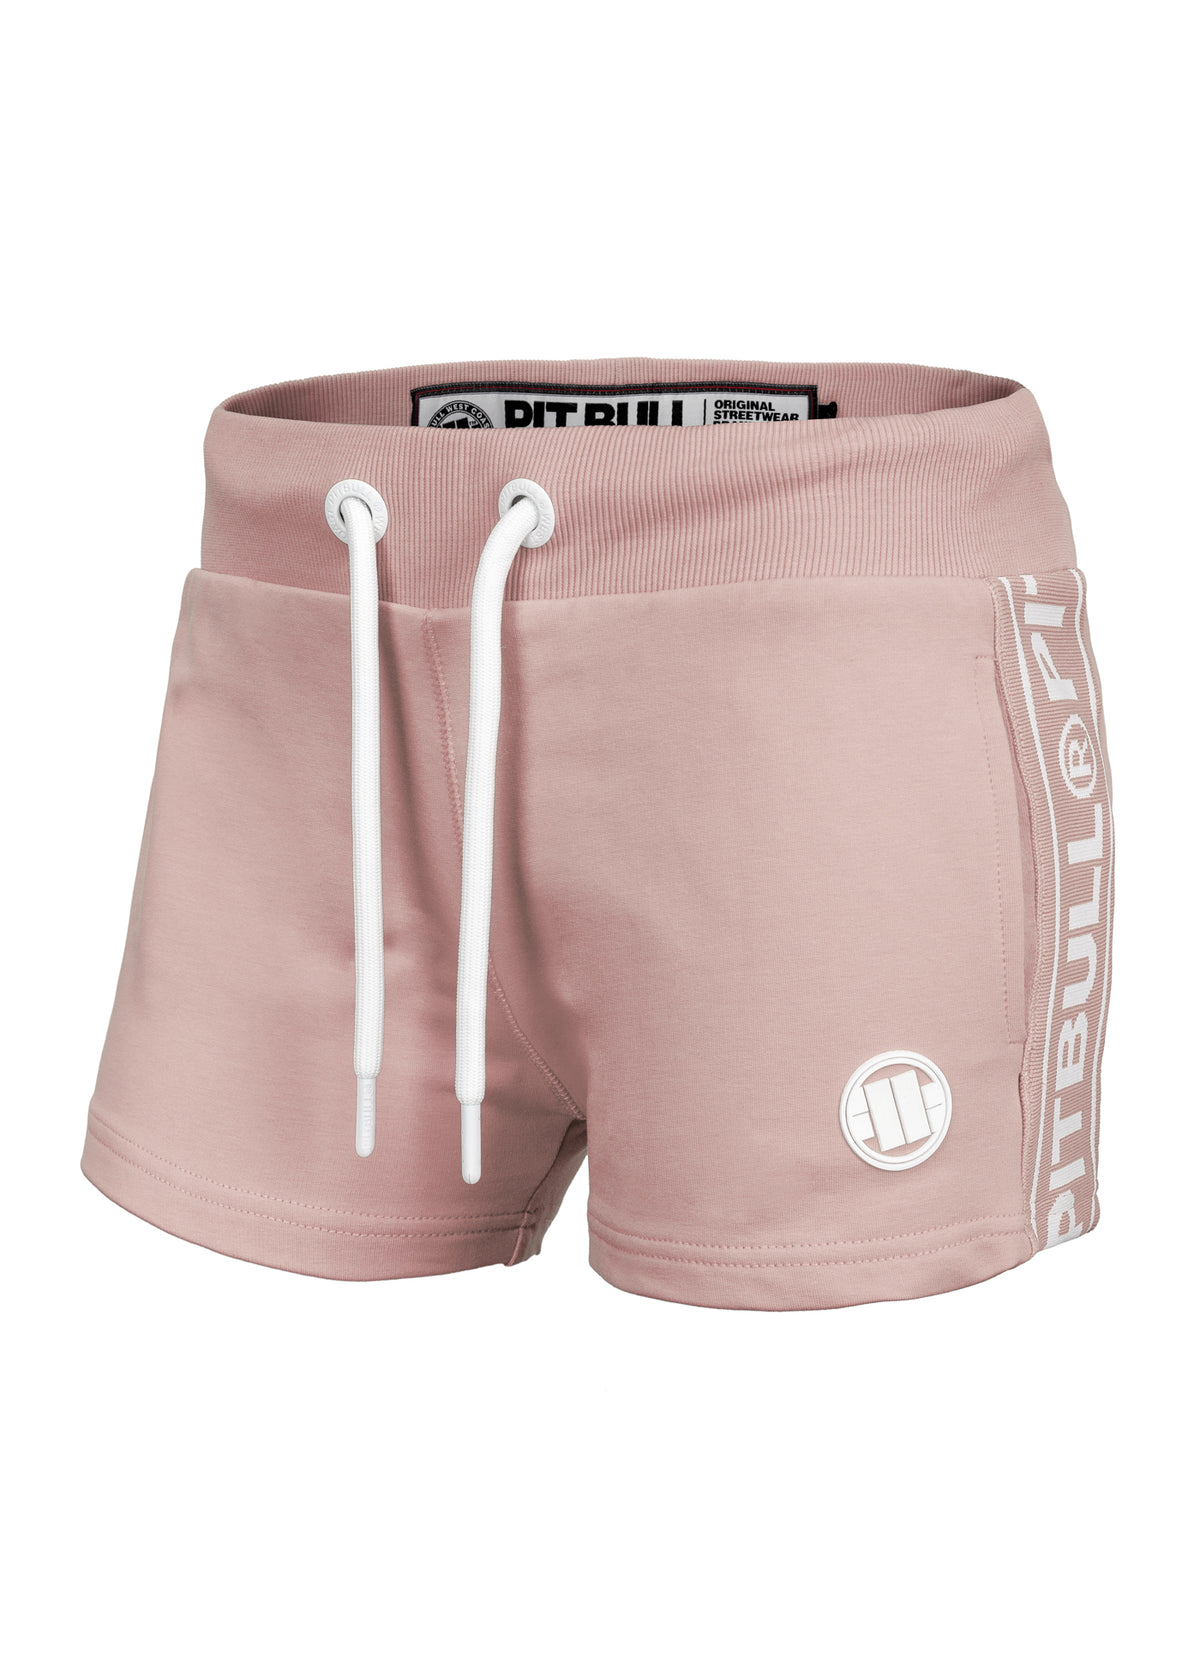 SMALL LOGO FRENCH TERRY 21 Pink shorts.